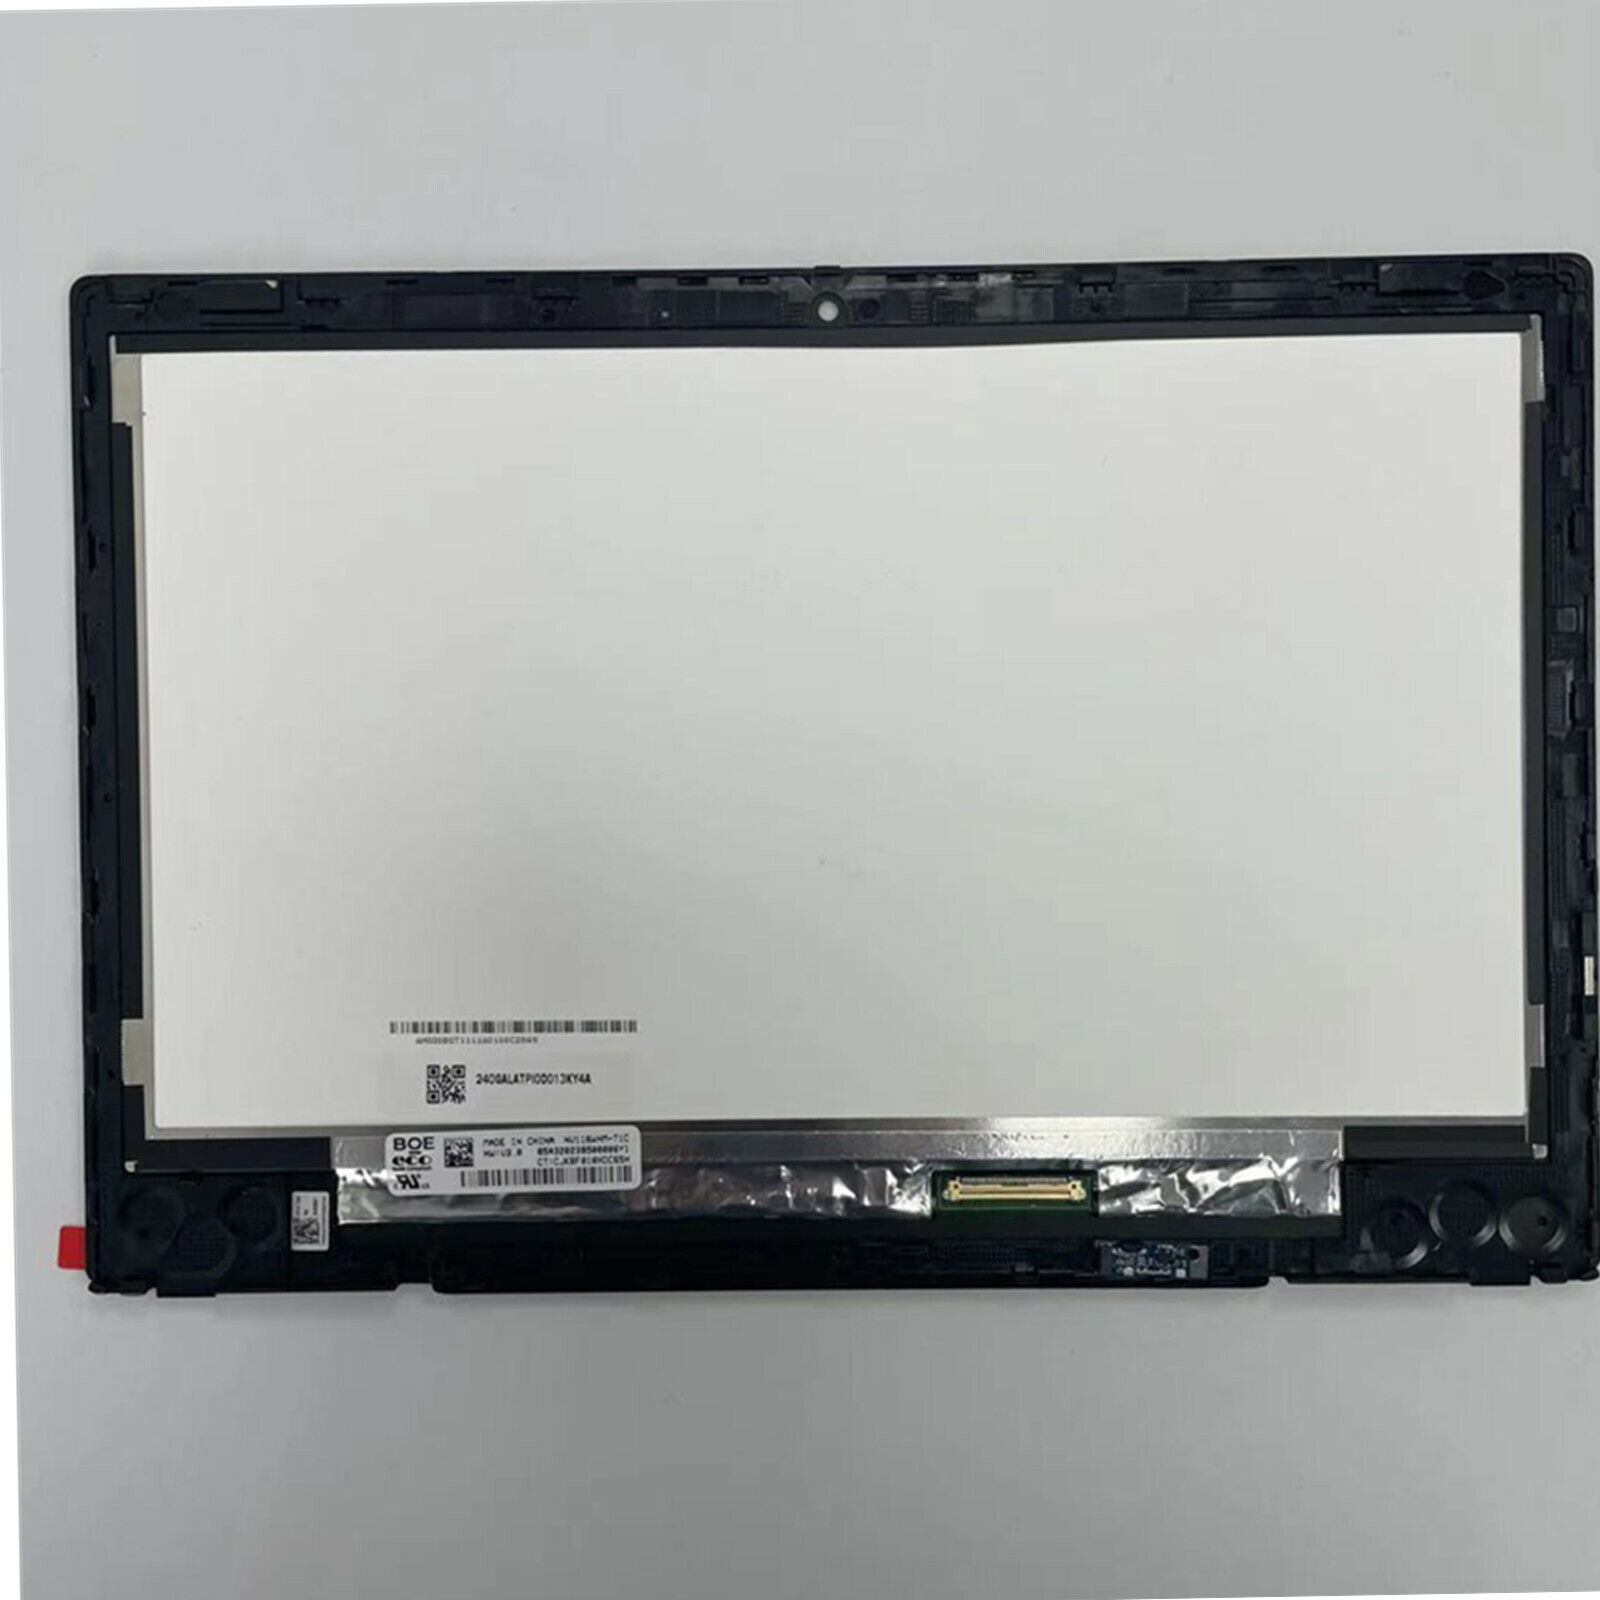 For HP Chromebook X360 11 G3 EE Lcd Touchscreen Digitizer Assembly L92338-001 US